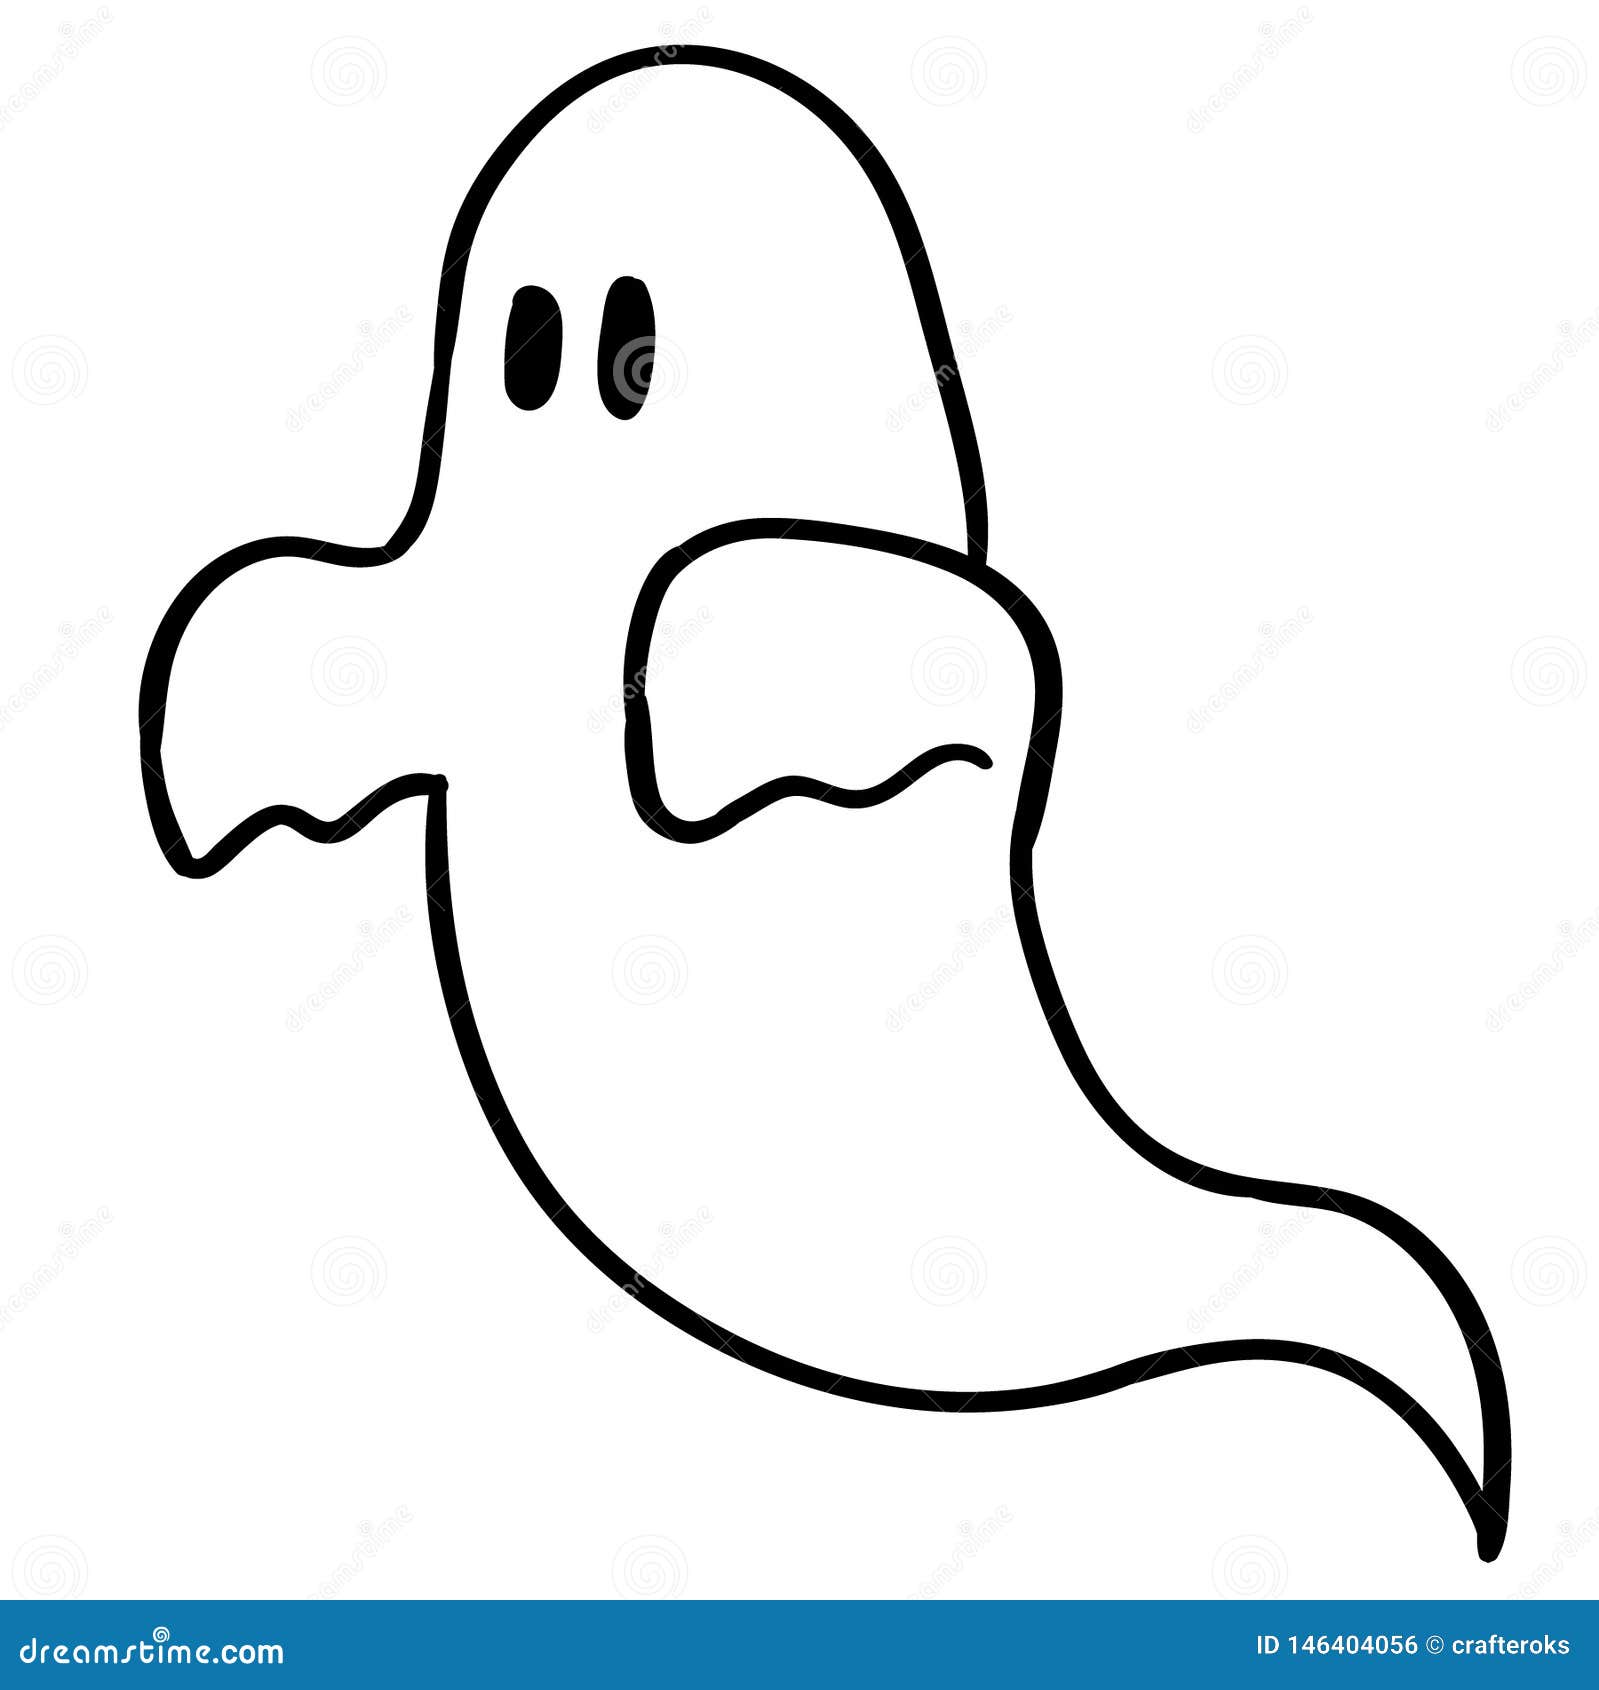 ghost vector image